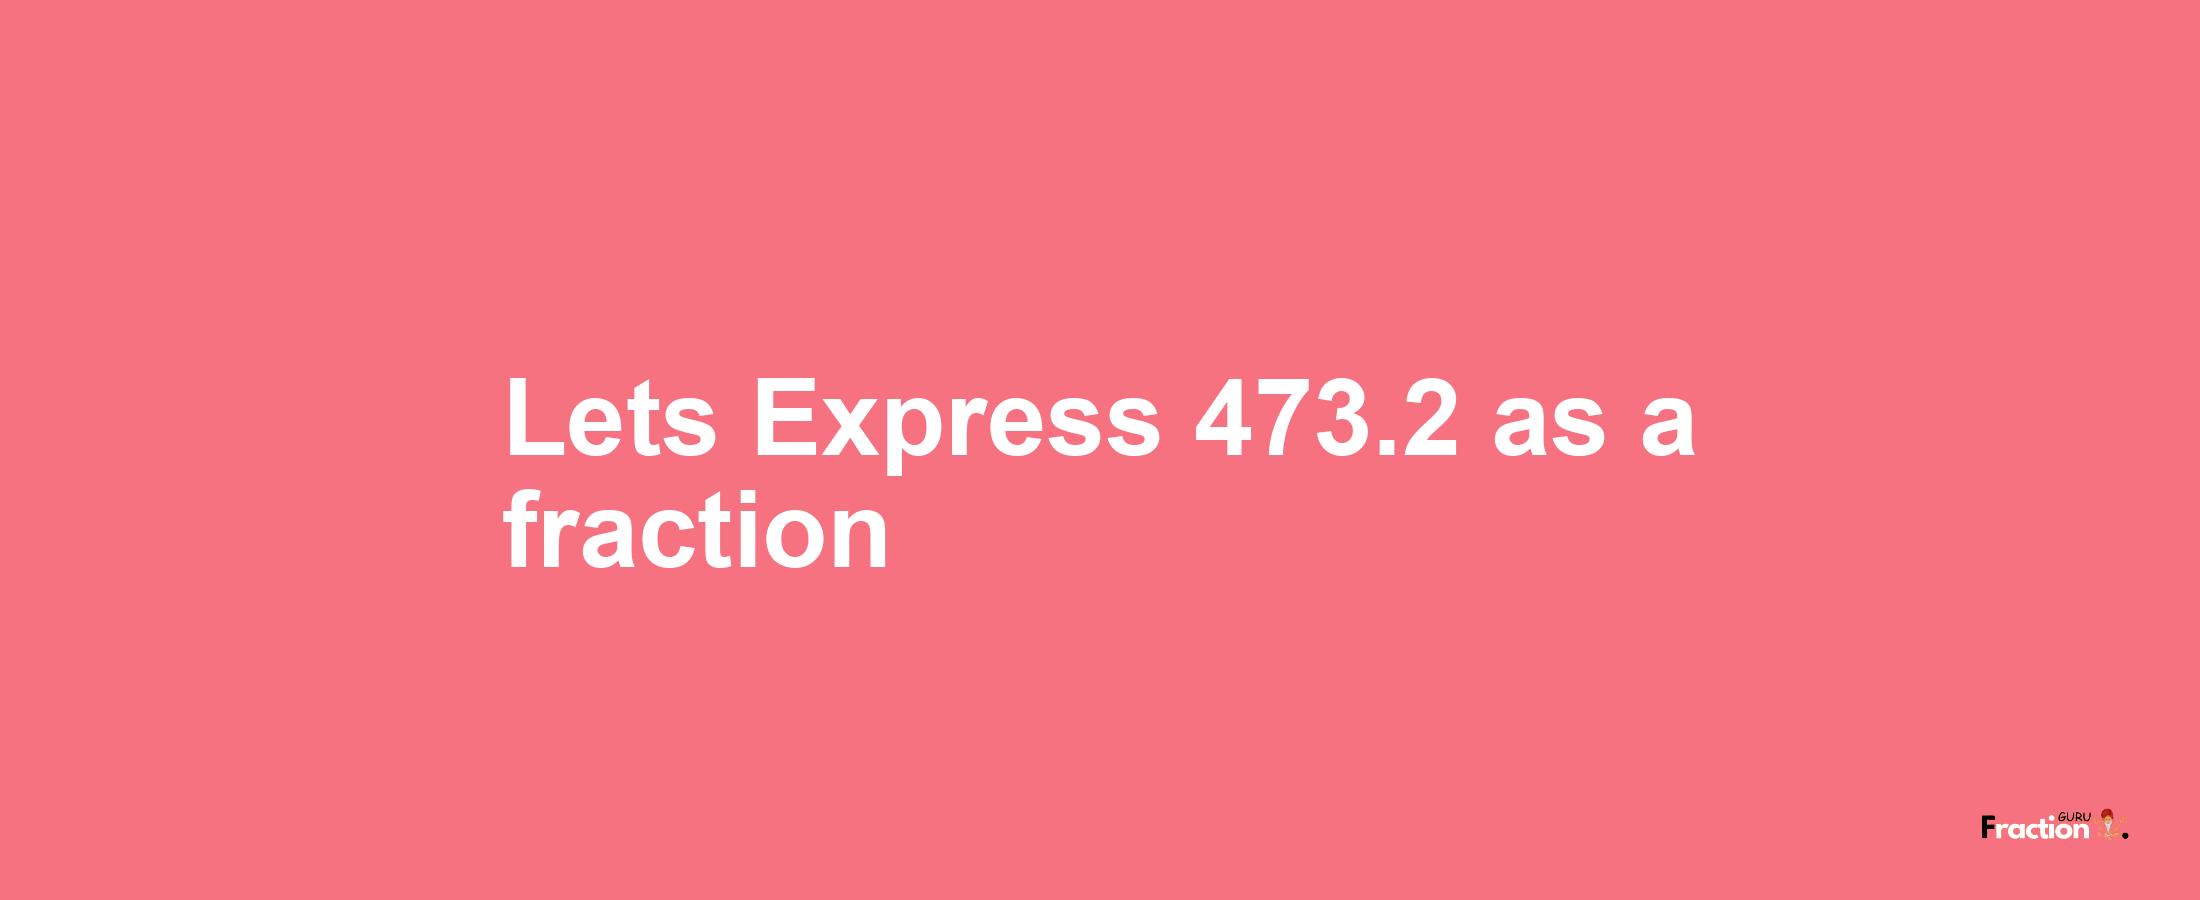 Lets Express 473.2 as afraction